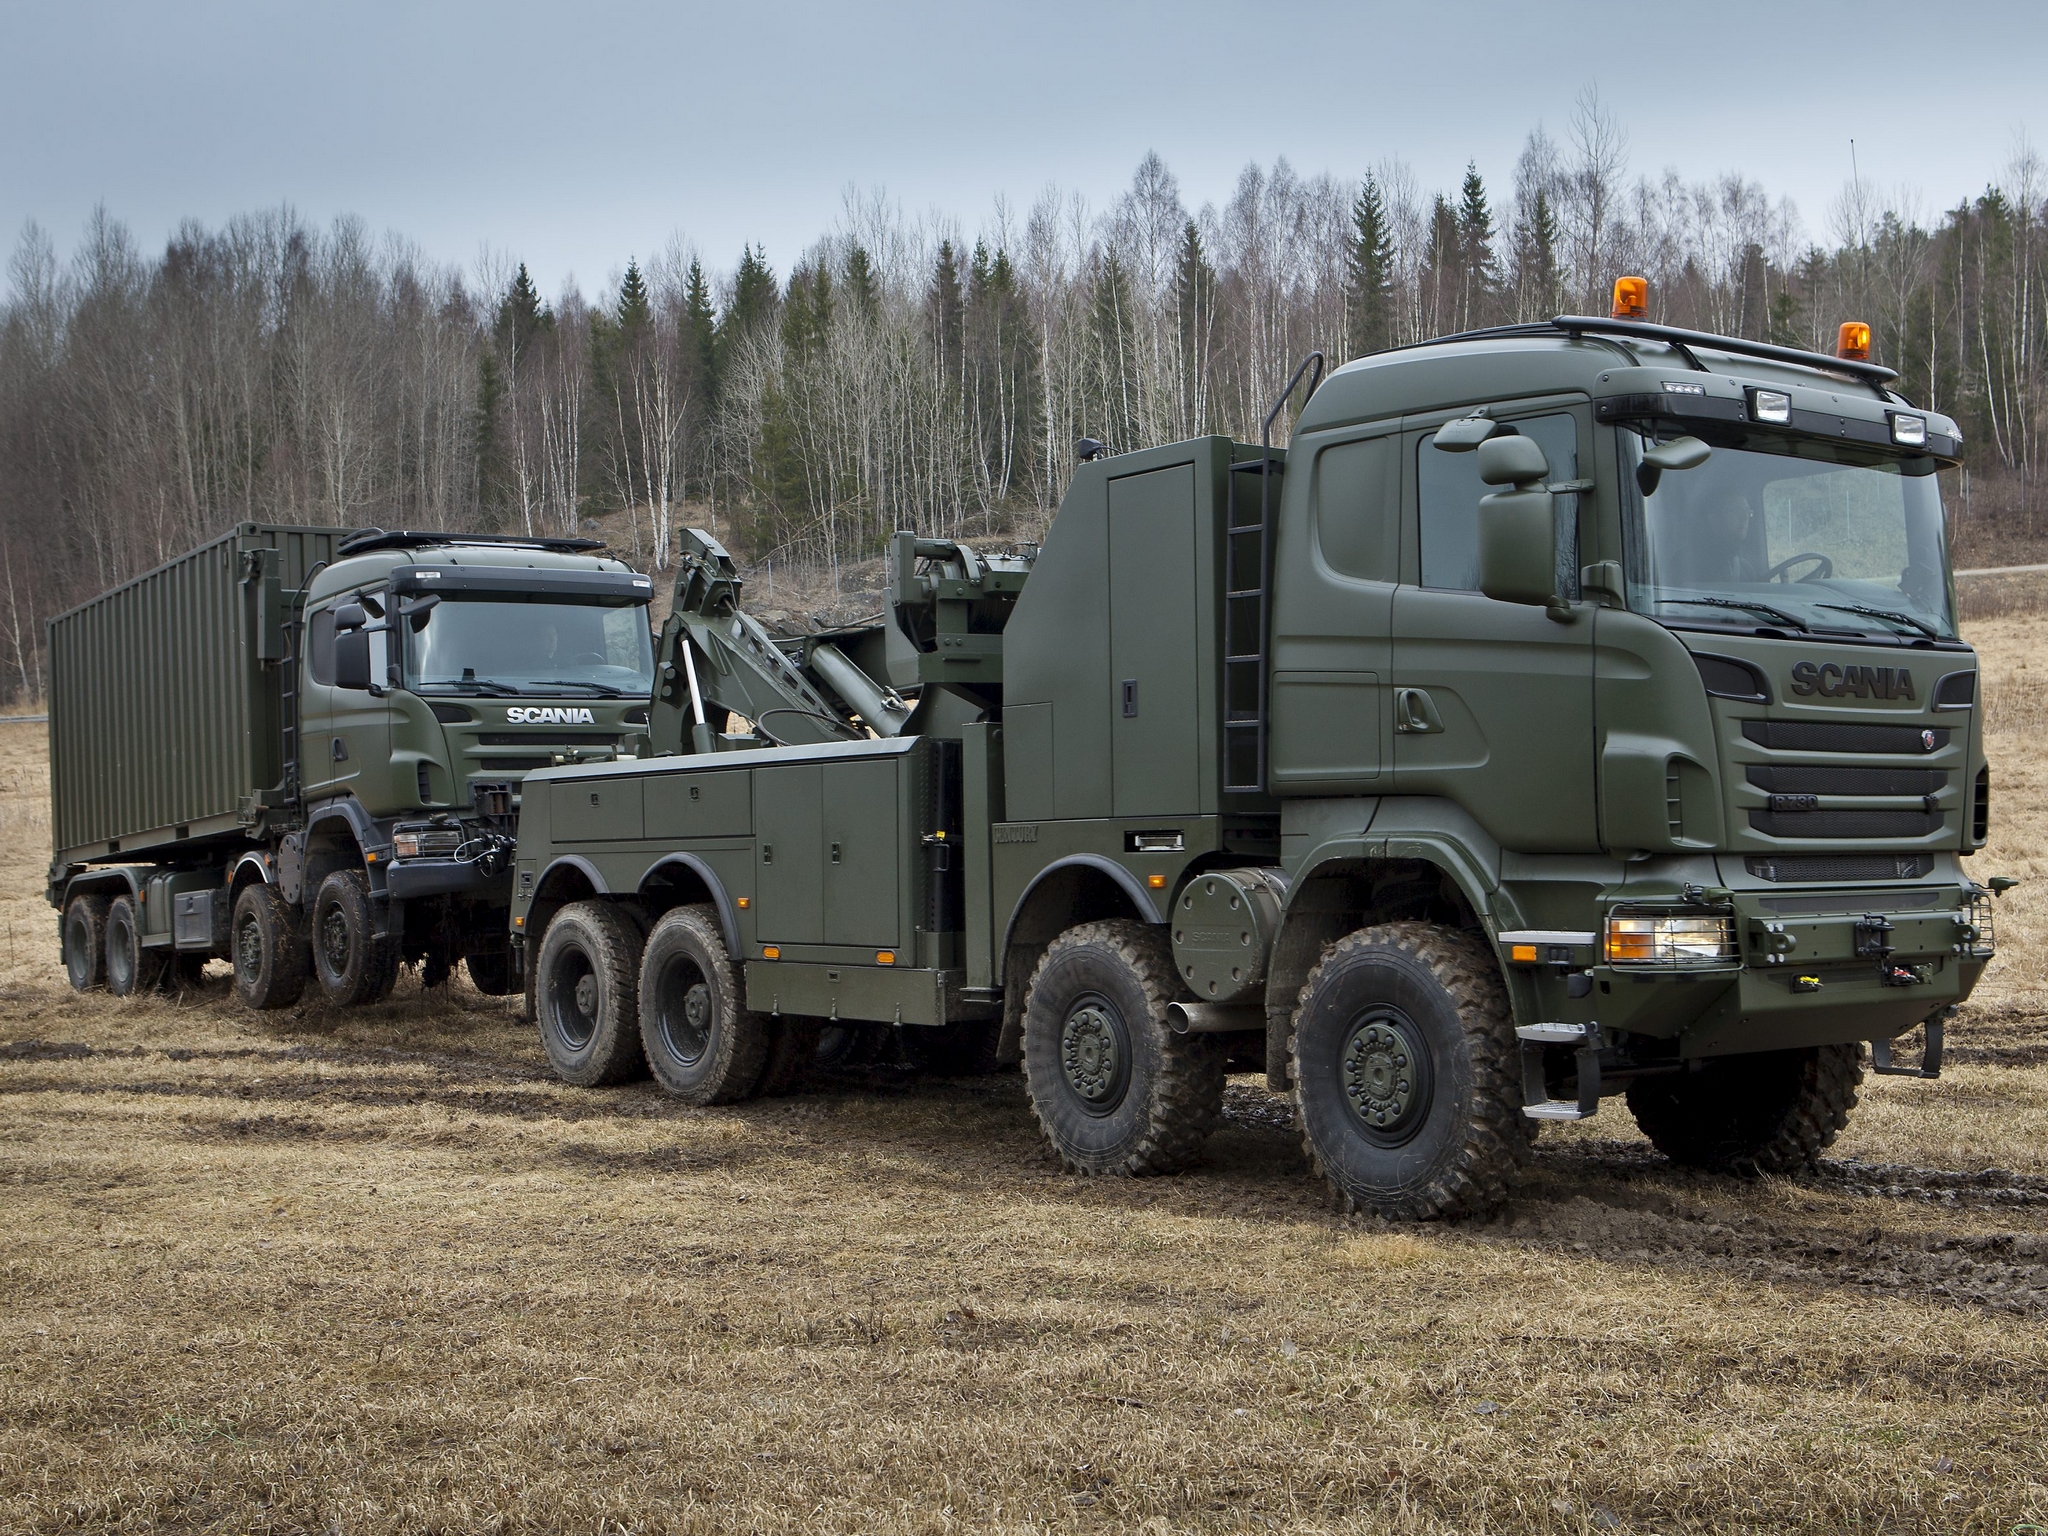 2010, Scania, R730, 8x8, Recovery, Towtruck, Military, Semi, Tractor, Emergency Wallpaper